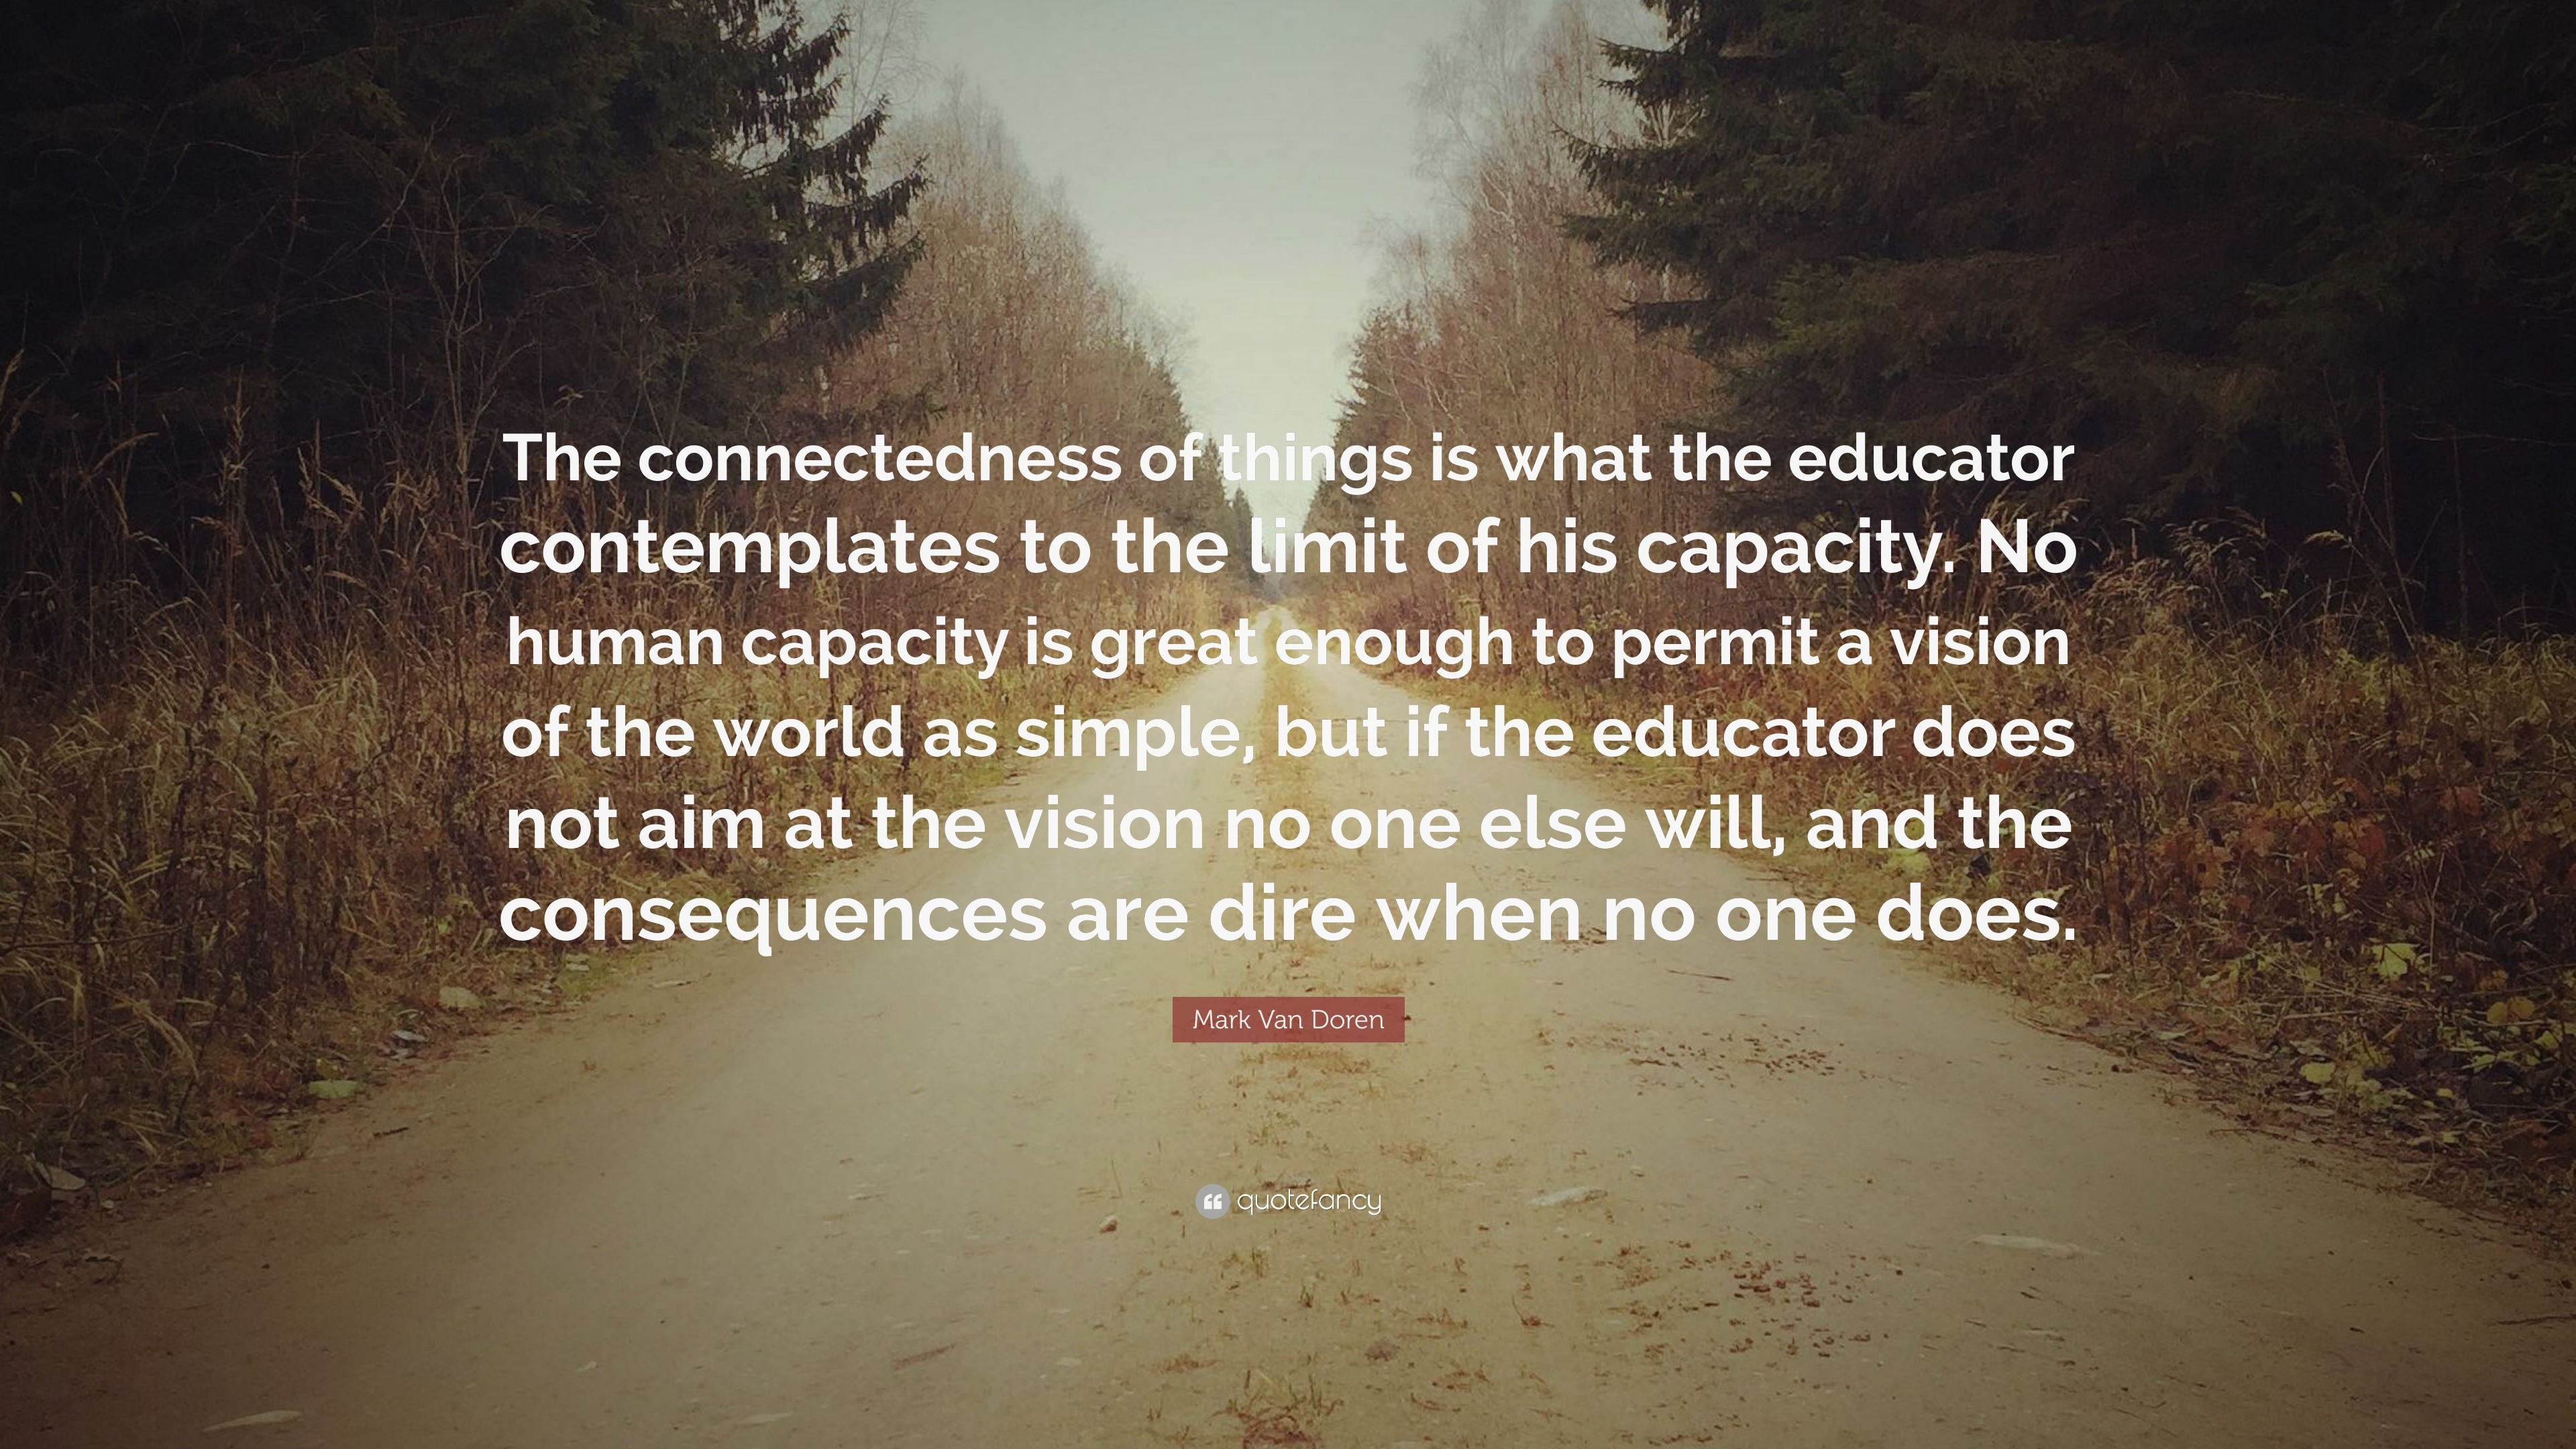 Mark Van Doren Quote: “The connectedness of things is what the educator ...